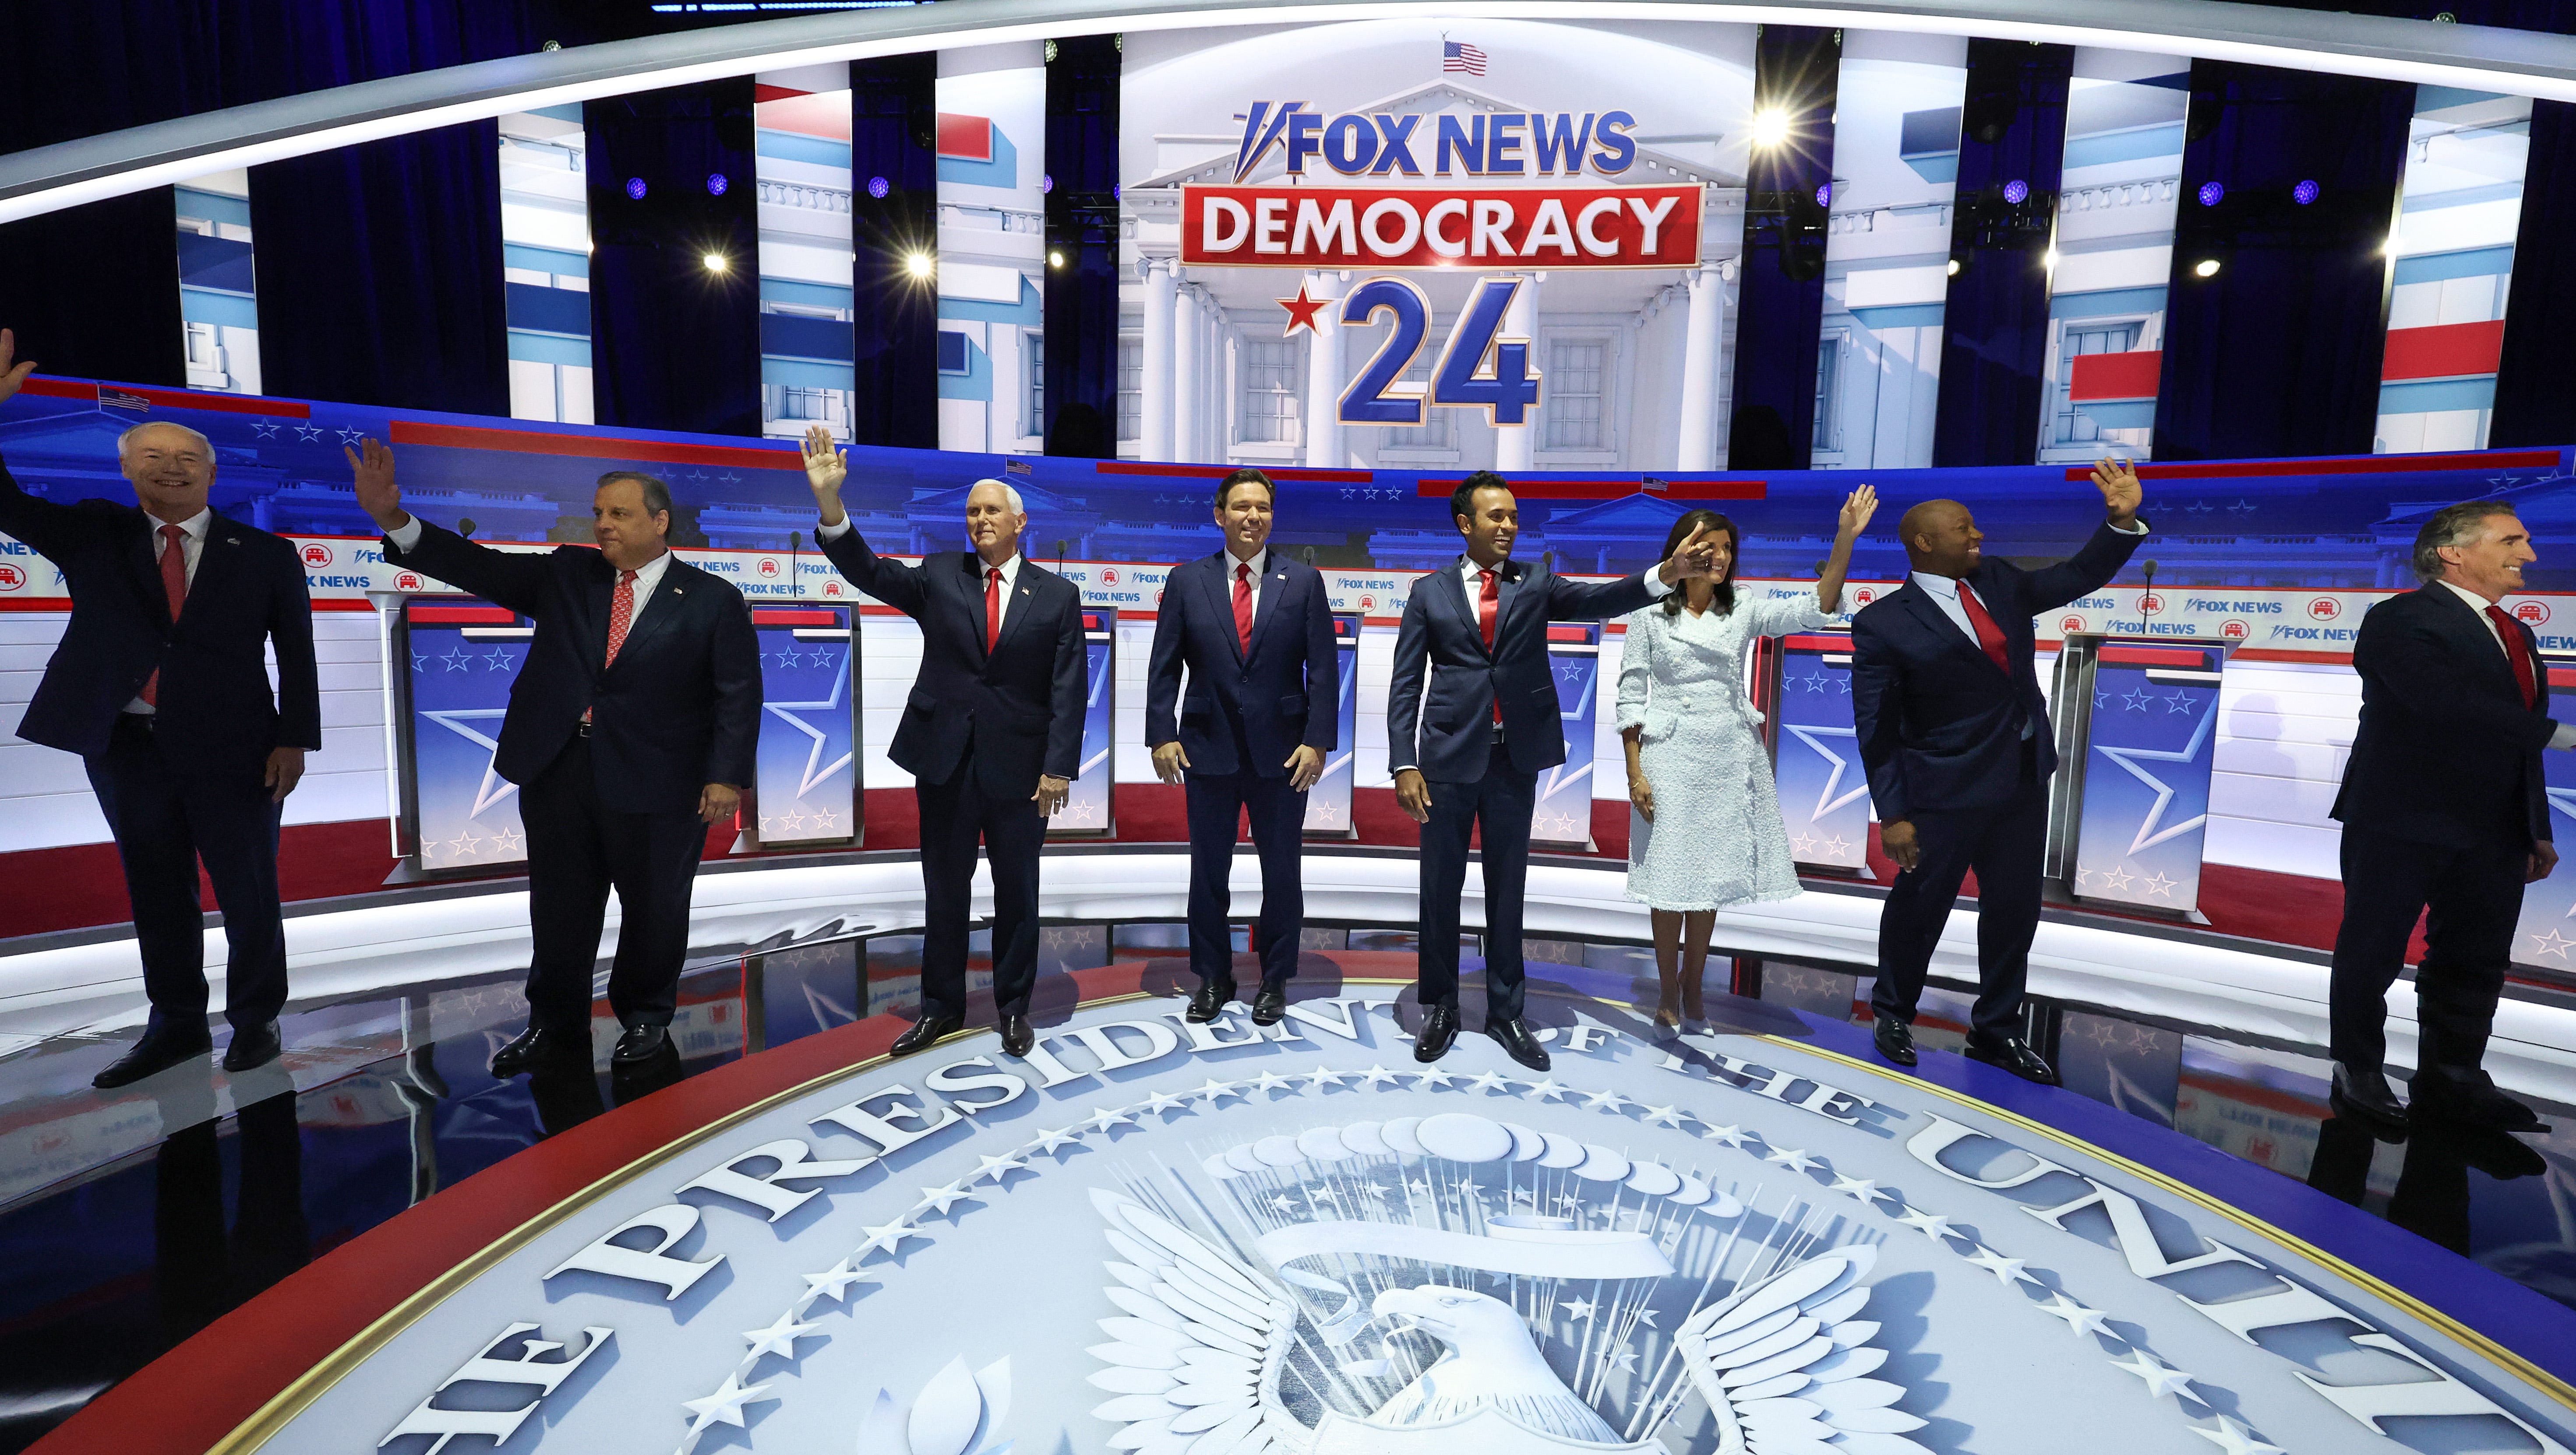 August 23, 2023: Republican presidential candidates (L-R), former Arkansas Gov. Asa Hutchinson, former New Jersey Gov. Chris Christie, former U.S. Vice President Mike Pence, Florida Gov. Ron DeSantis, Vivek Ramaswamy, former U.N. Ambassador Nikki Haley, U.S. Sen. Tim Scott (R-SC) and North Dakota governor Doug Burgum, are introduced during the first debate of the GOP primary season hosted by FOX News at the Fiserv Forum in Milwaukee, Wisconsin. The 8 presidential hopefuls squared off in the first Republican debate as former U.S. President Donald Trump, currently facing indictments in four locations, declined to participate in the event.